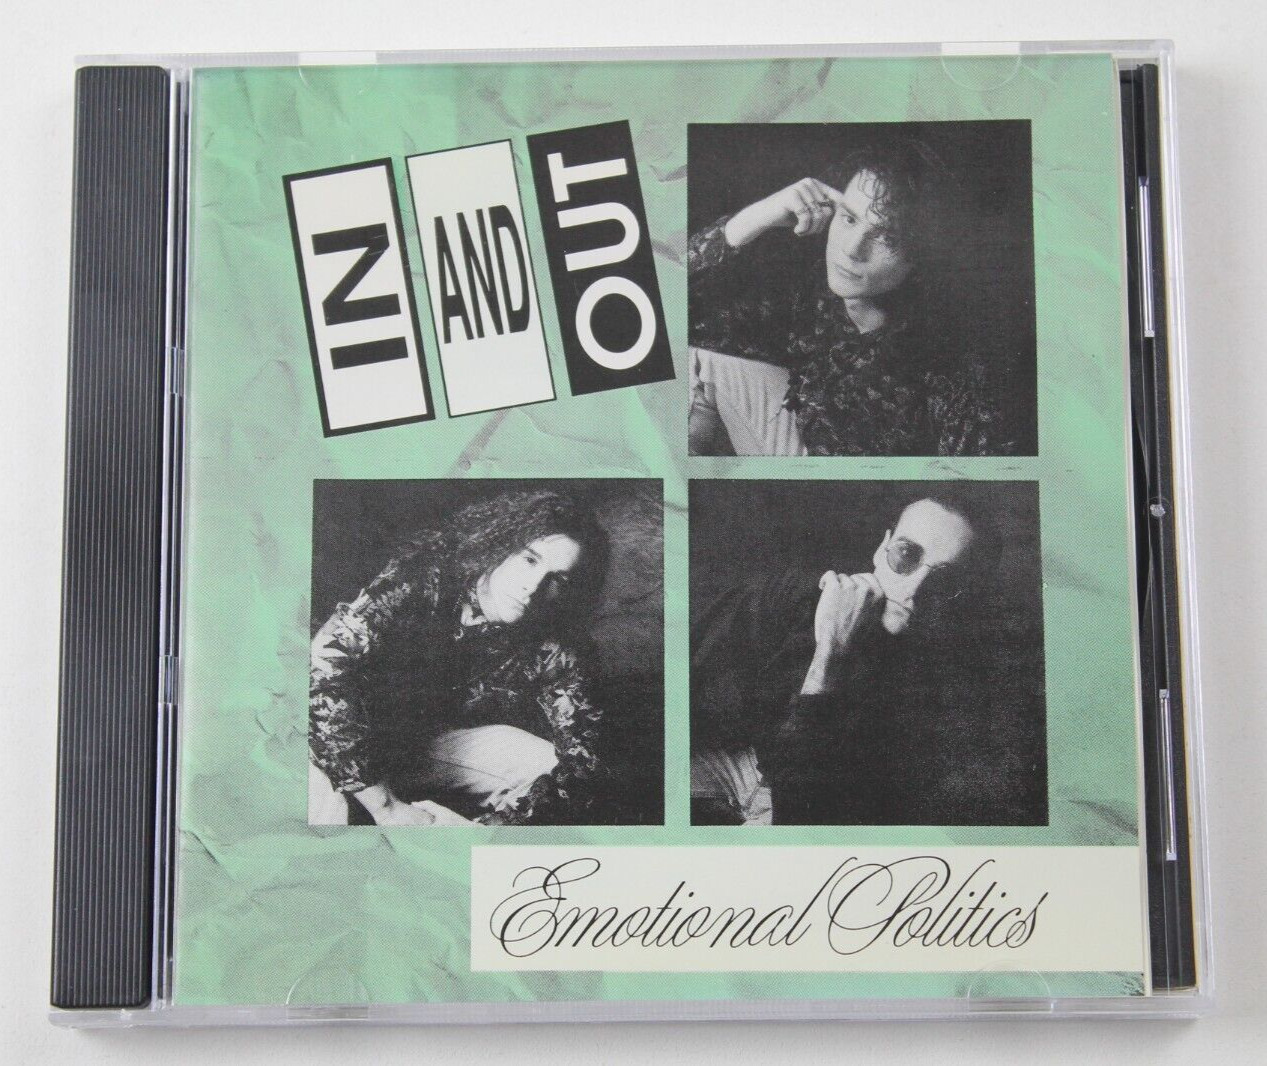 IN AND OUT - Emotional Politics CD DNDCD-001 RARE 1990